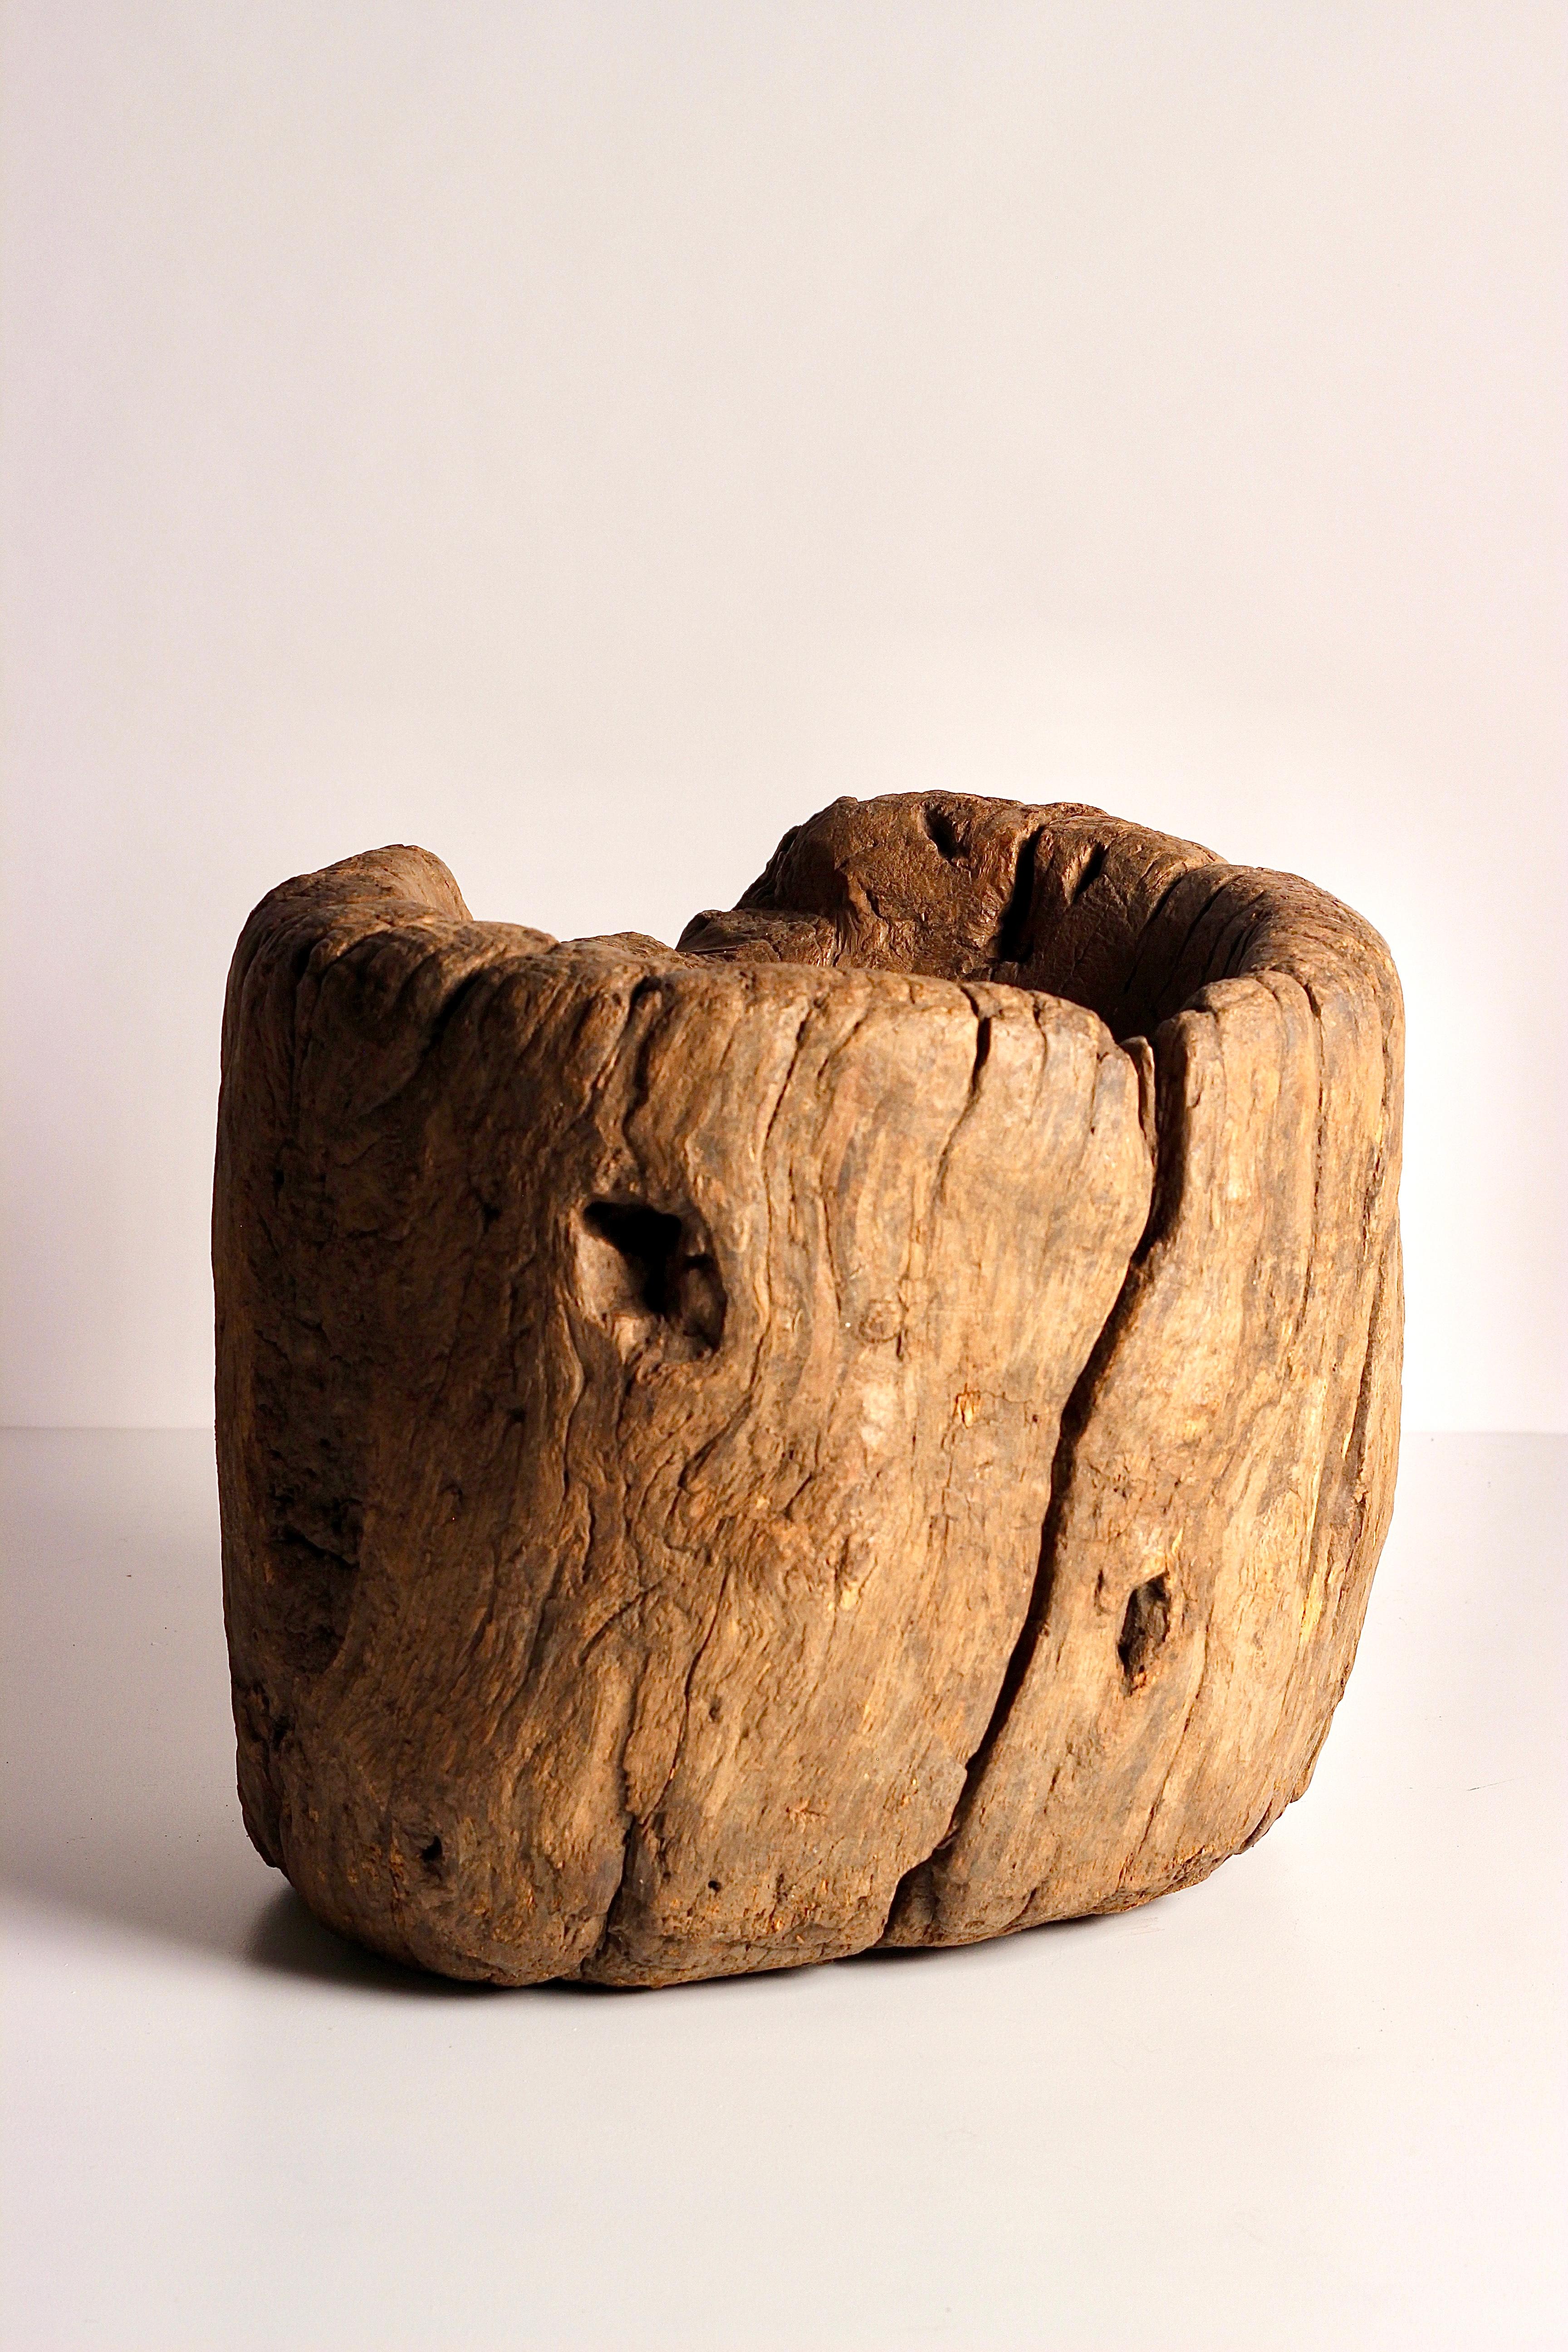 Rustic Elm Wooden Large Mortar Bowl Hand Carved from One Piece of Tree Trunk For Sale 1